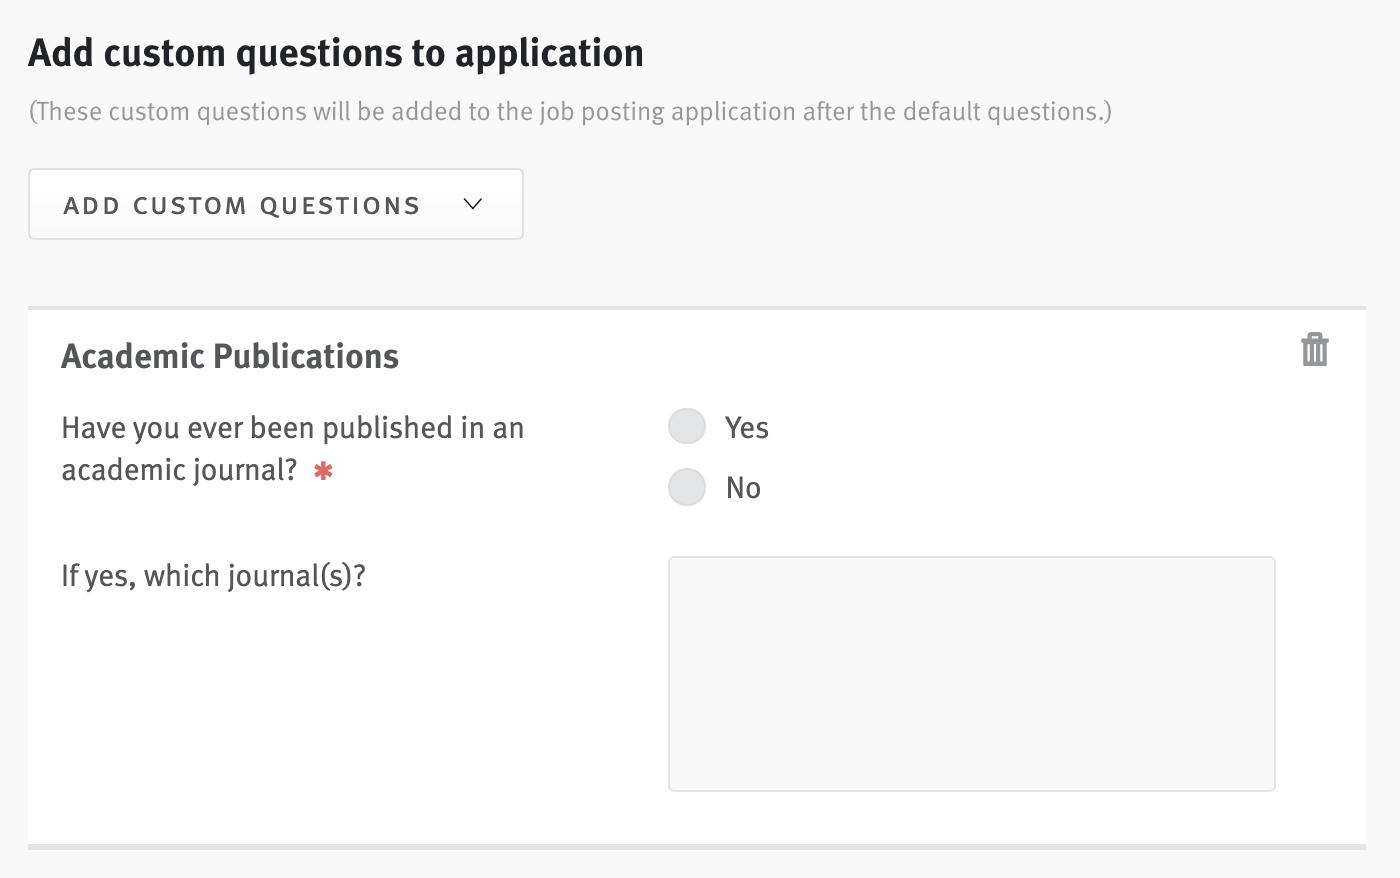 Custom questions from the previous image appearing in the job posting editor.